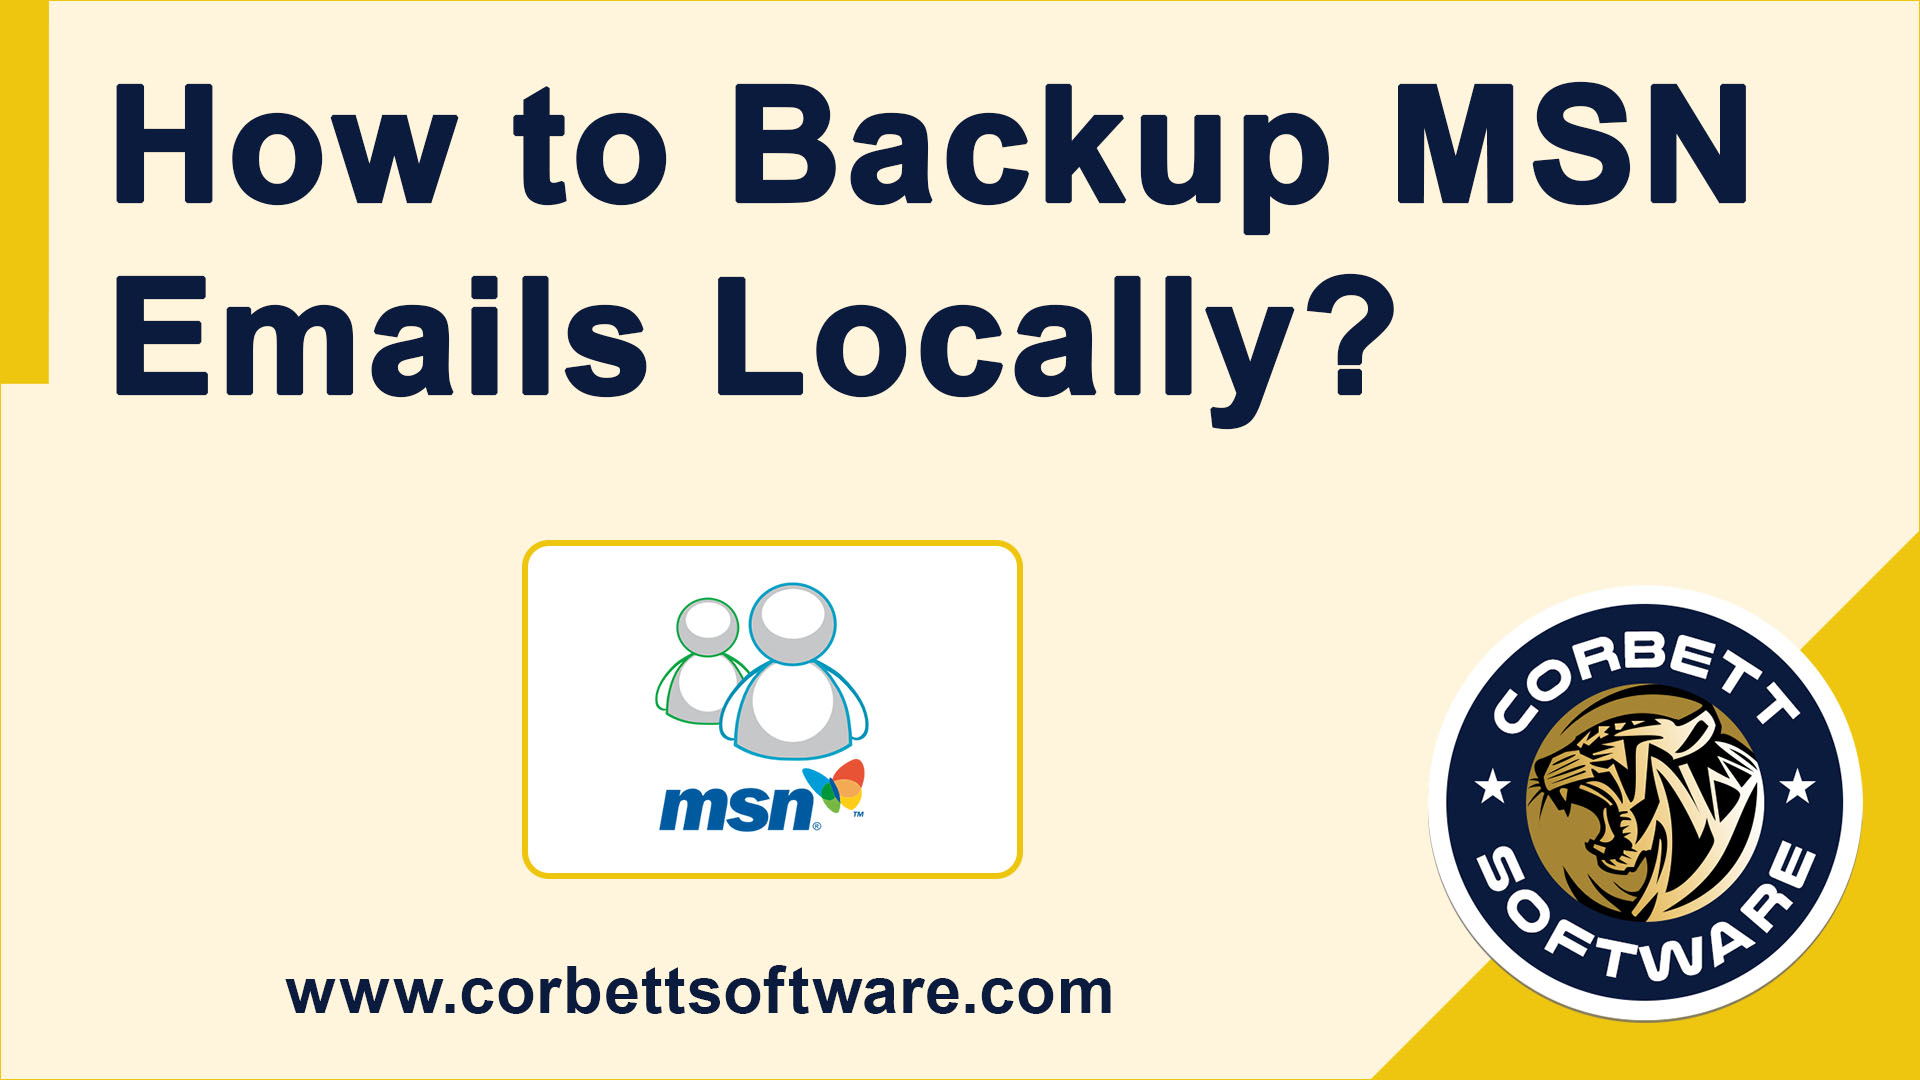 Backup MSN Emails Locally